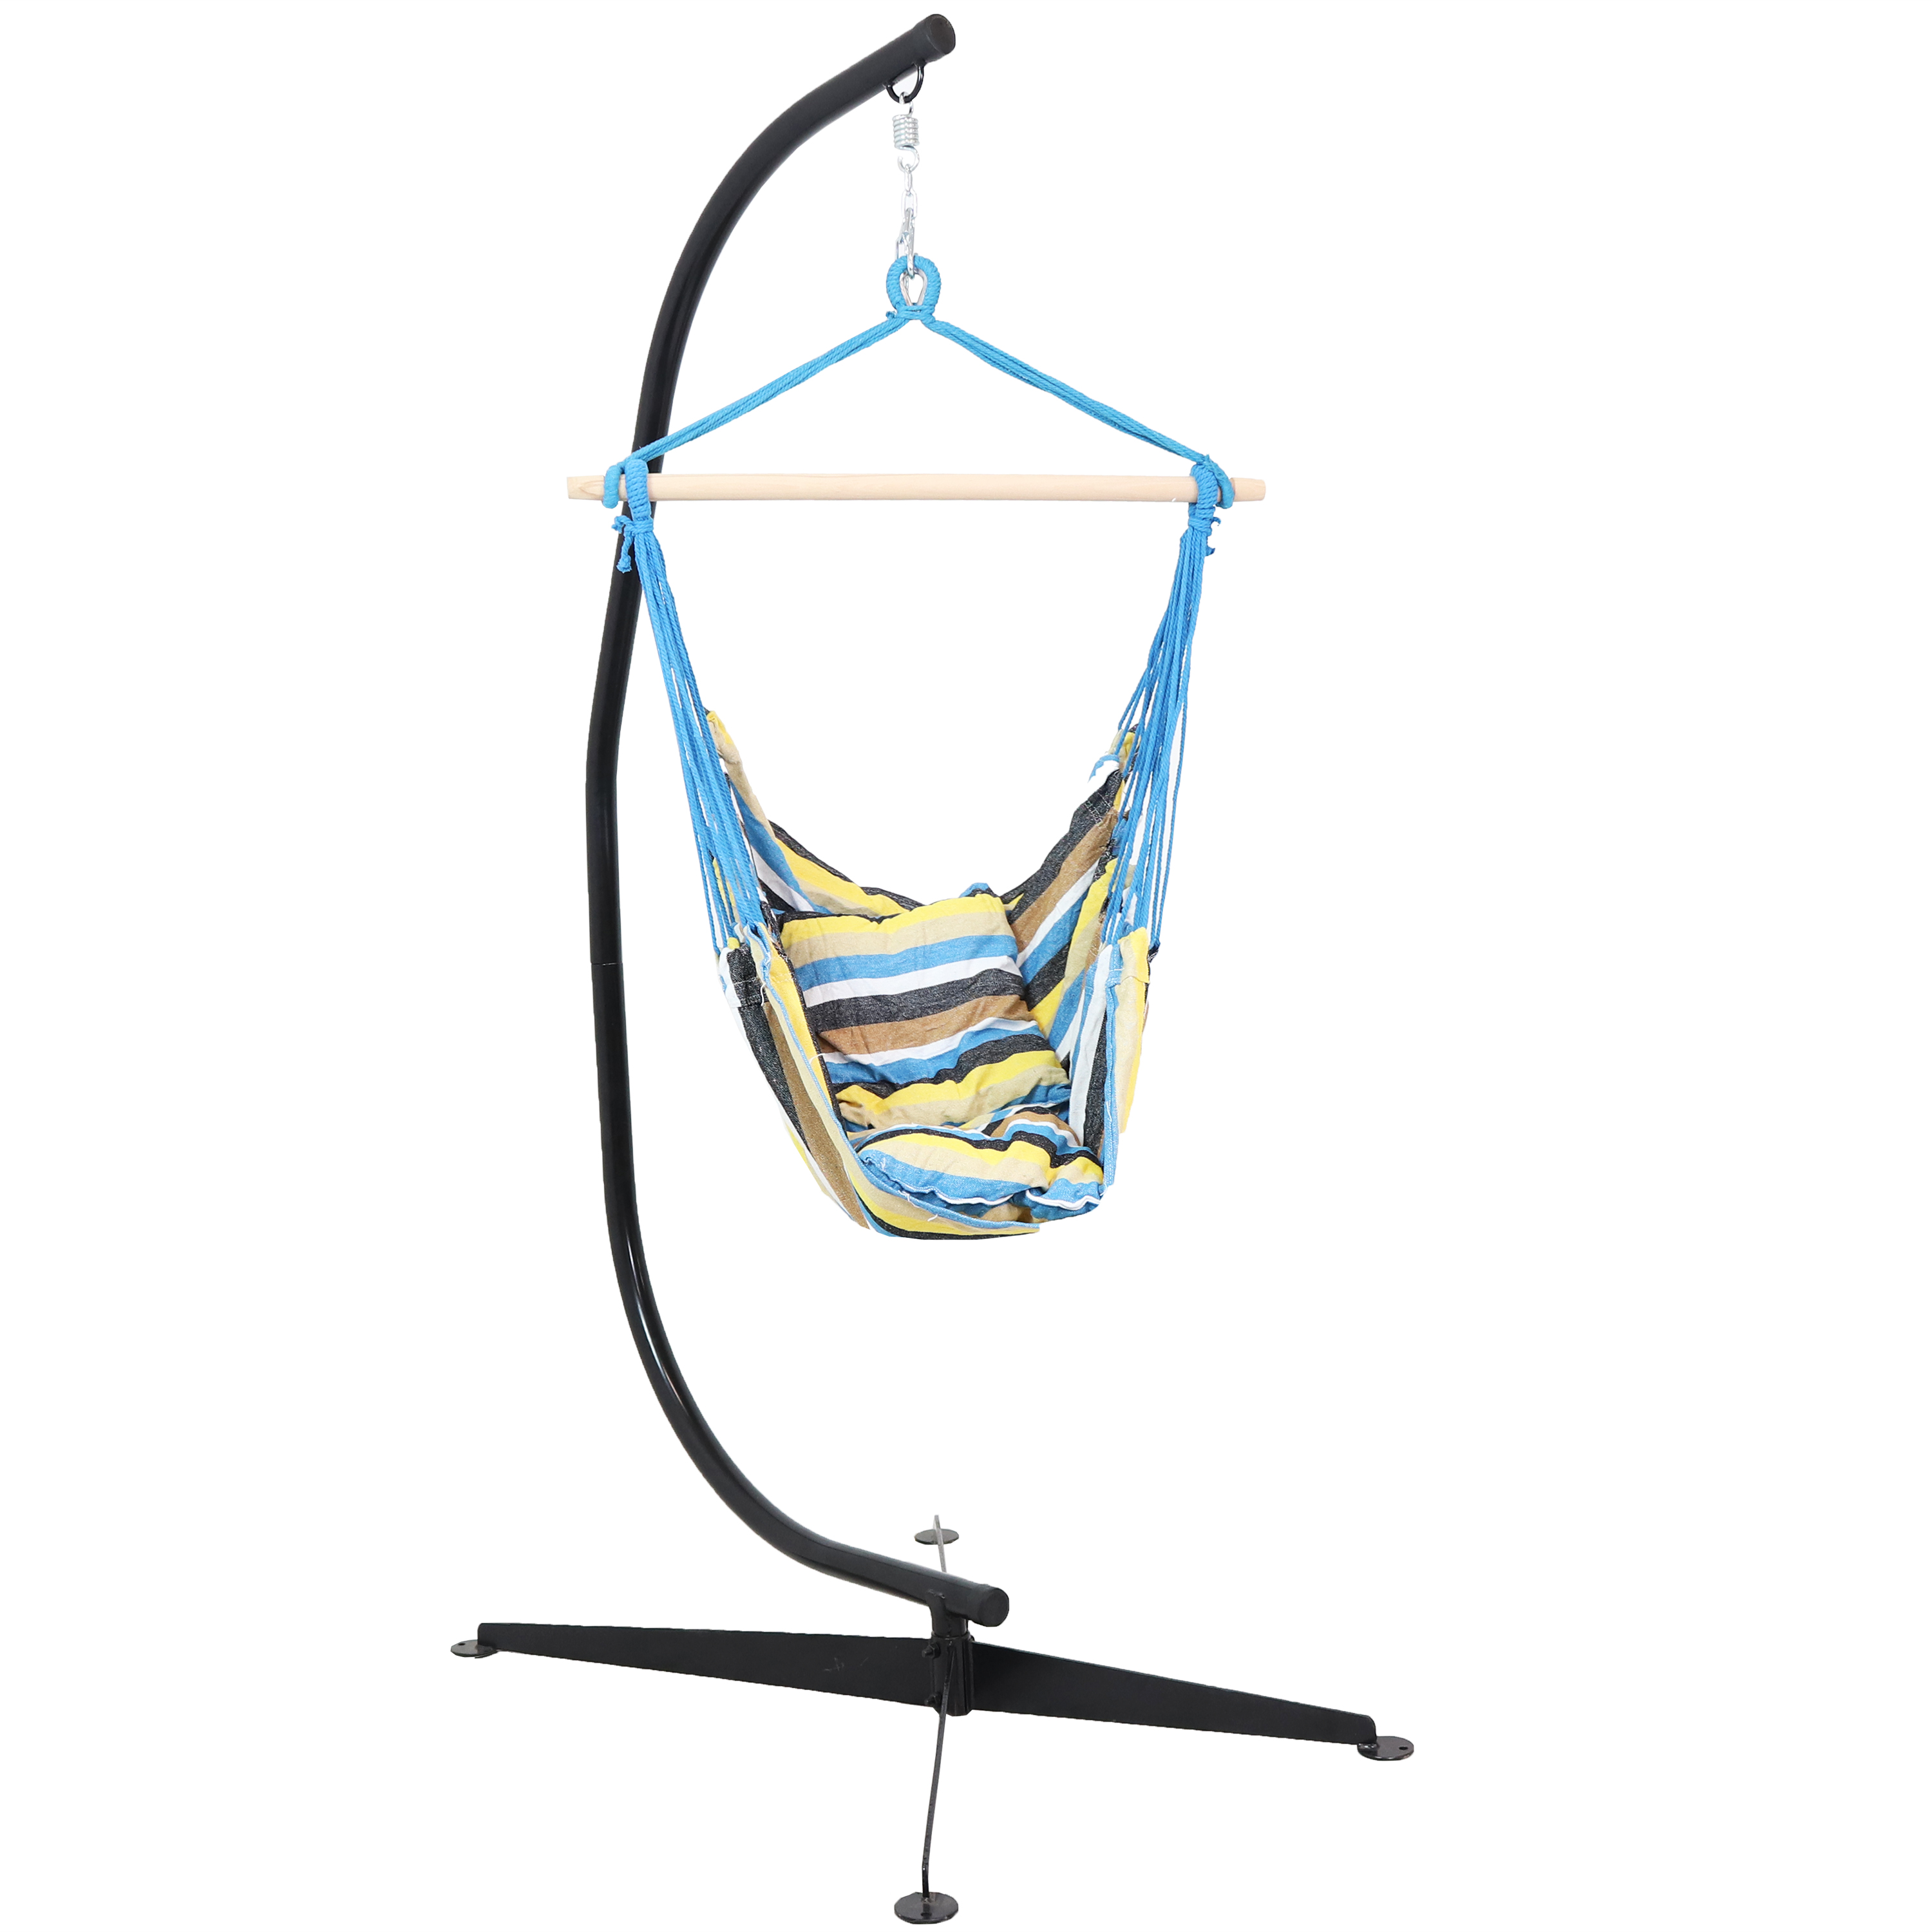 Sunnydaze Hanging Hammock Chair Swing and C-Stand Set, for Outdoor Use, Max Weight: 265 pounds, Includes 2 Seat Cushions, Ocean View